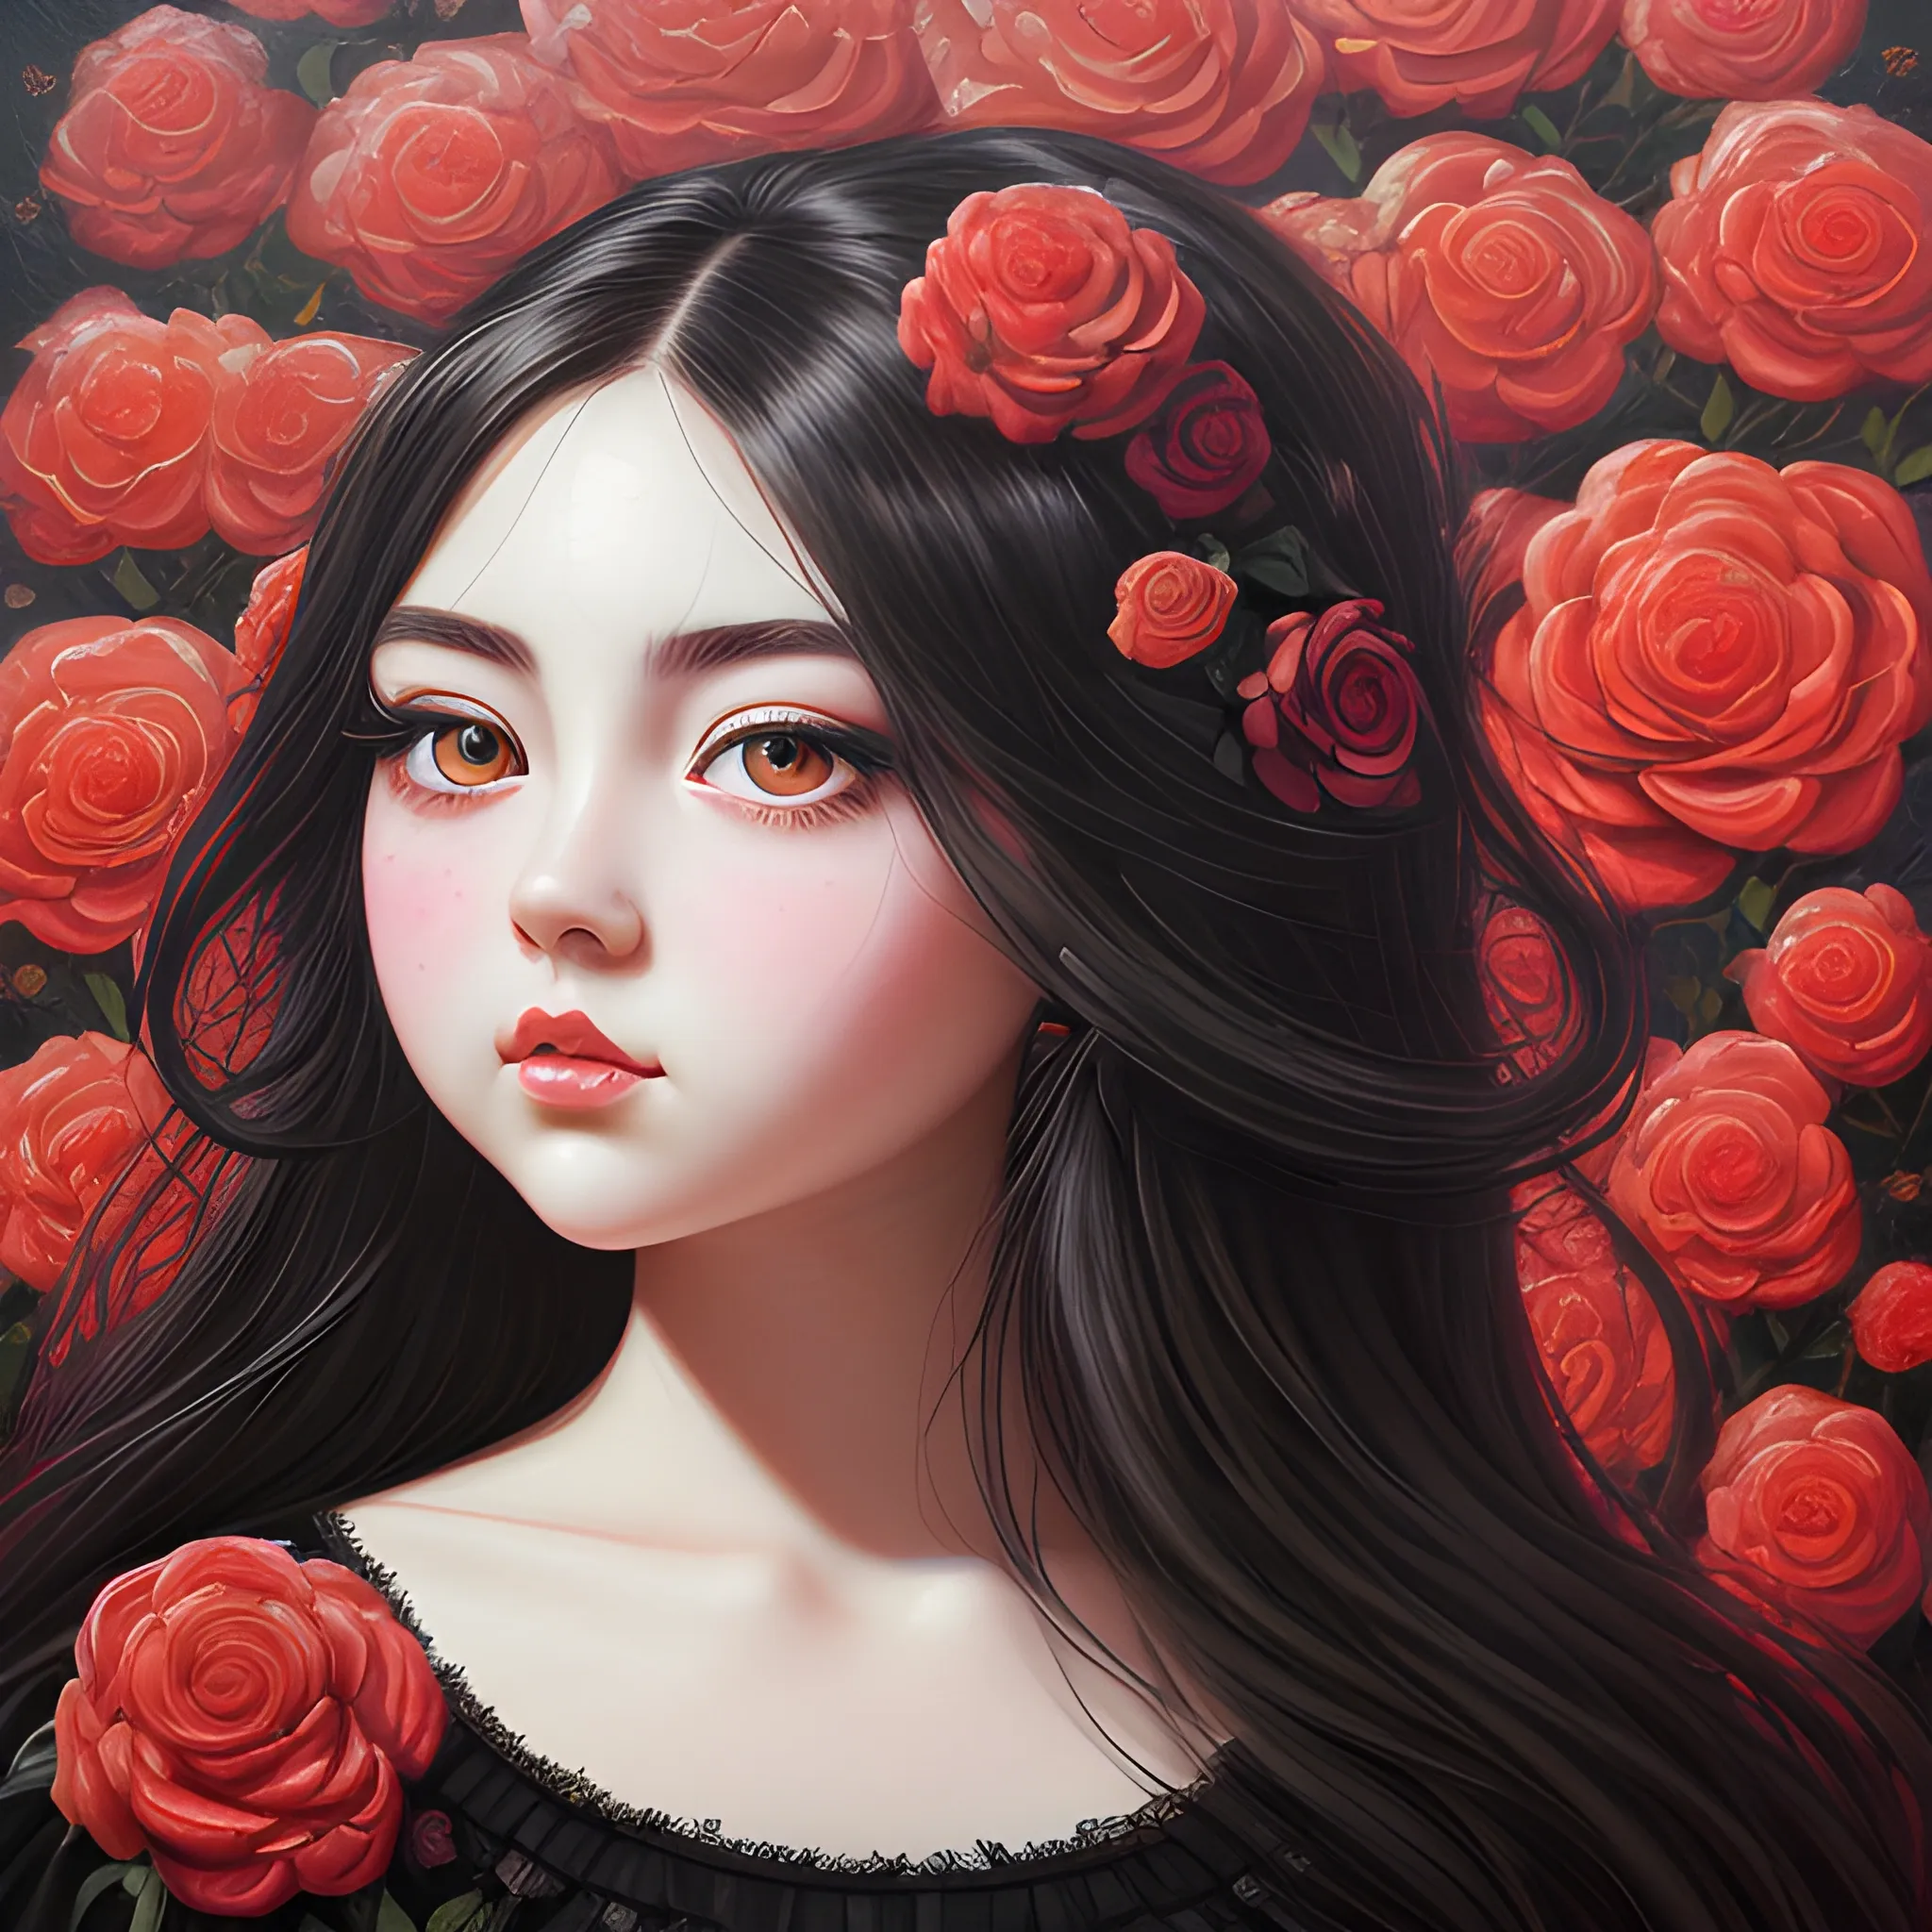 (((high detail))), best quality, Warm Colors, (detailed), (high resolution)Black long-haired female, curvy face, with rosy cheeks, big black eyes, thick eyelashes, thick peach lips, thick eyebrows,  with a black and red dress, roses of backround Trippy, Oil Painting, wallper , 